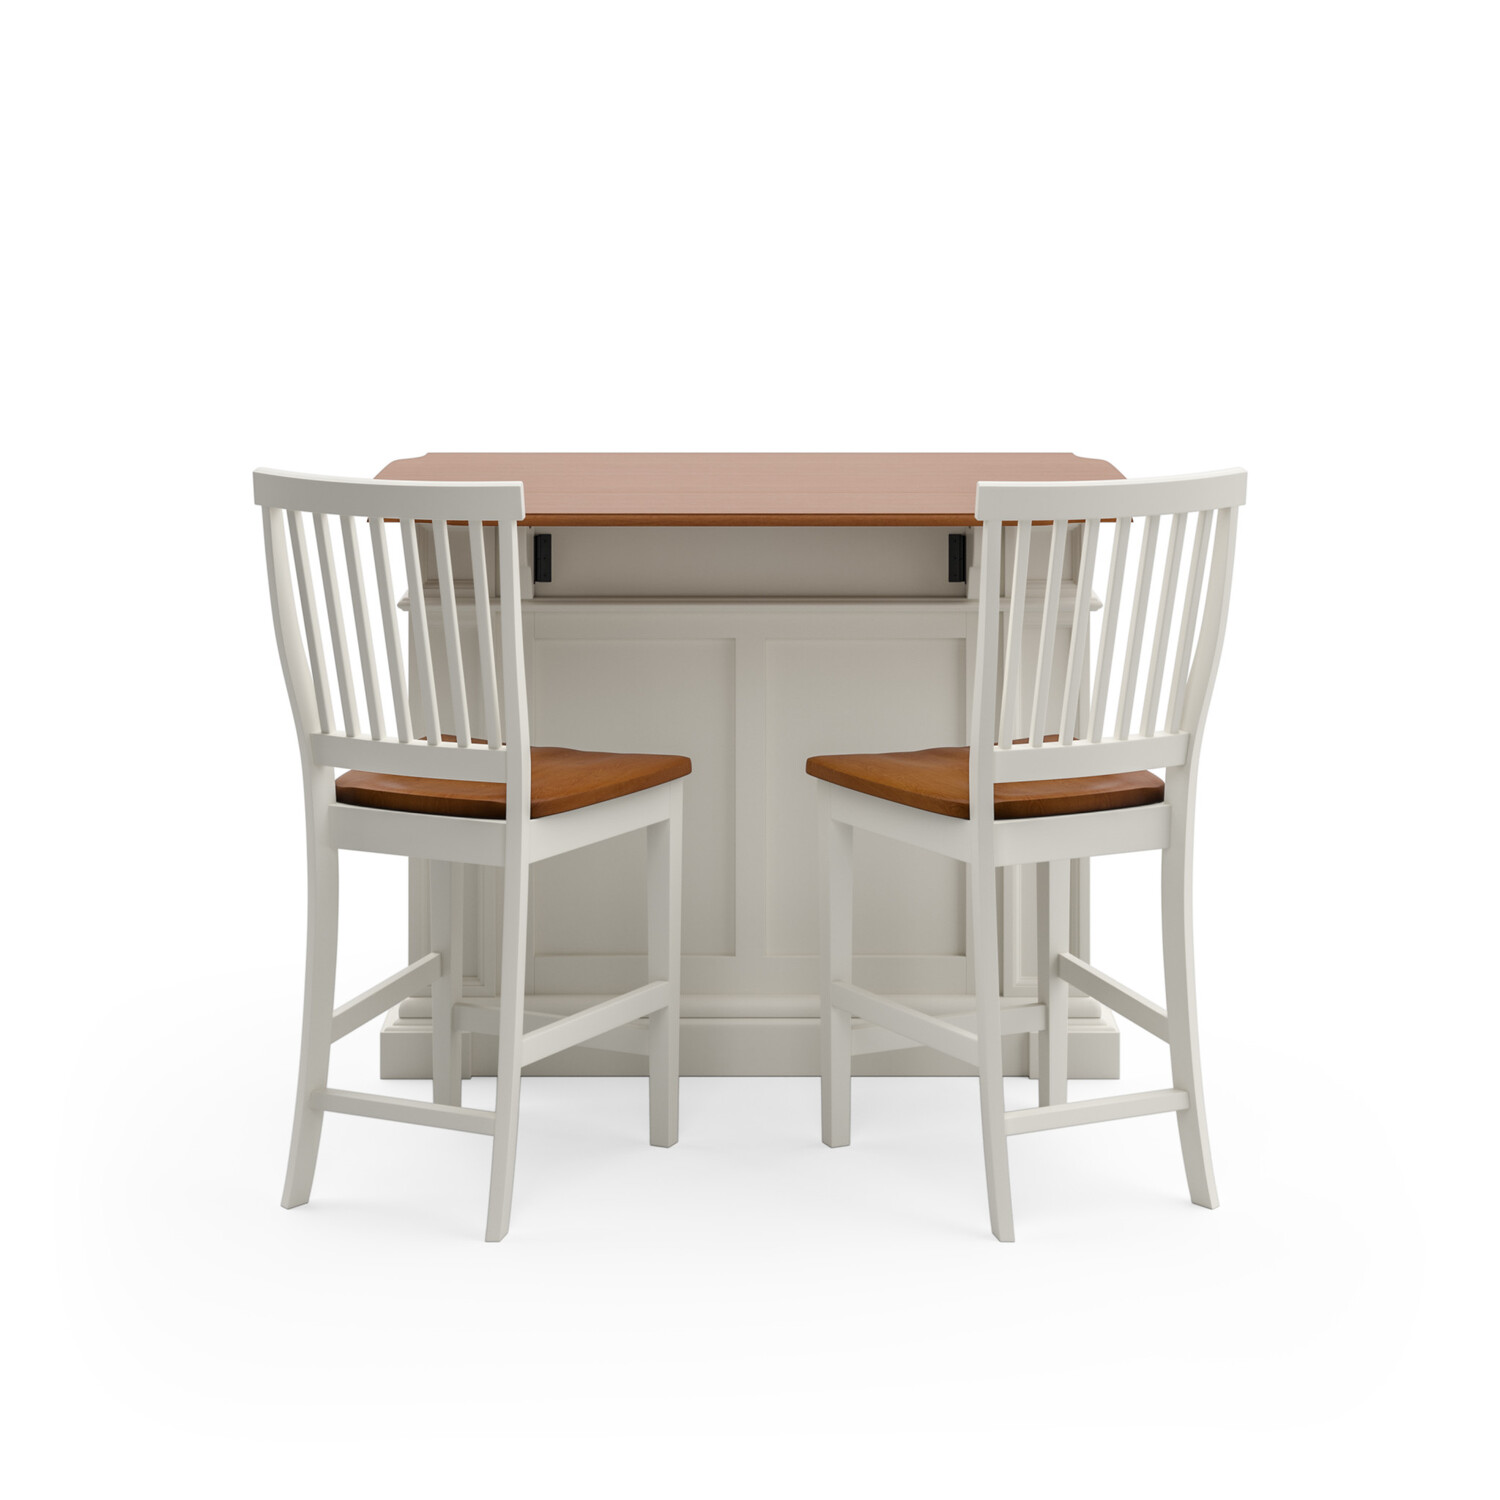 Homestyles Americana Wood Kitchen Island Set in Off White - image 4 of 7